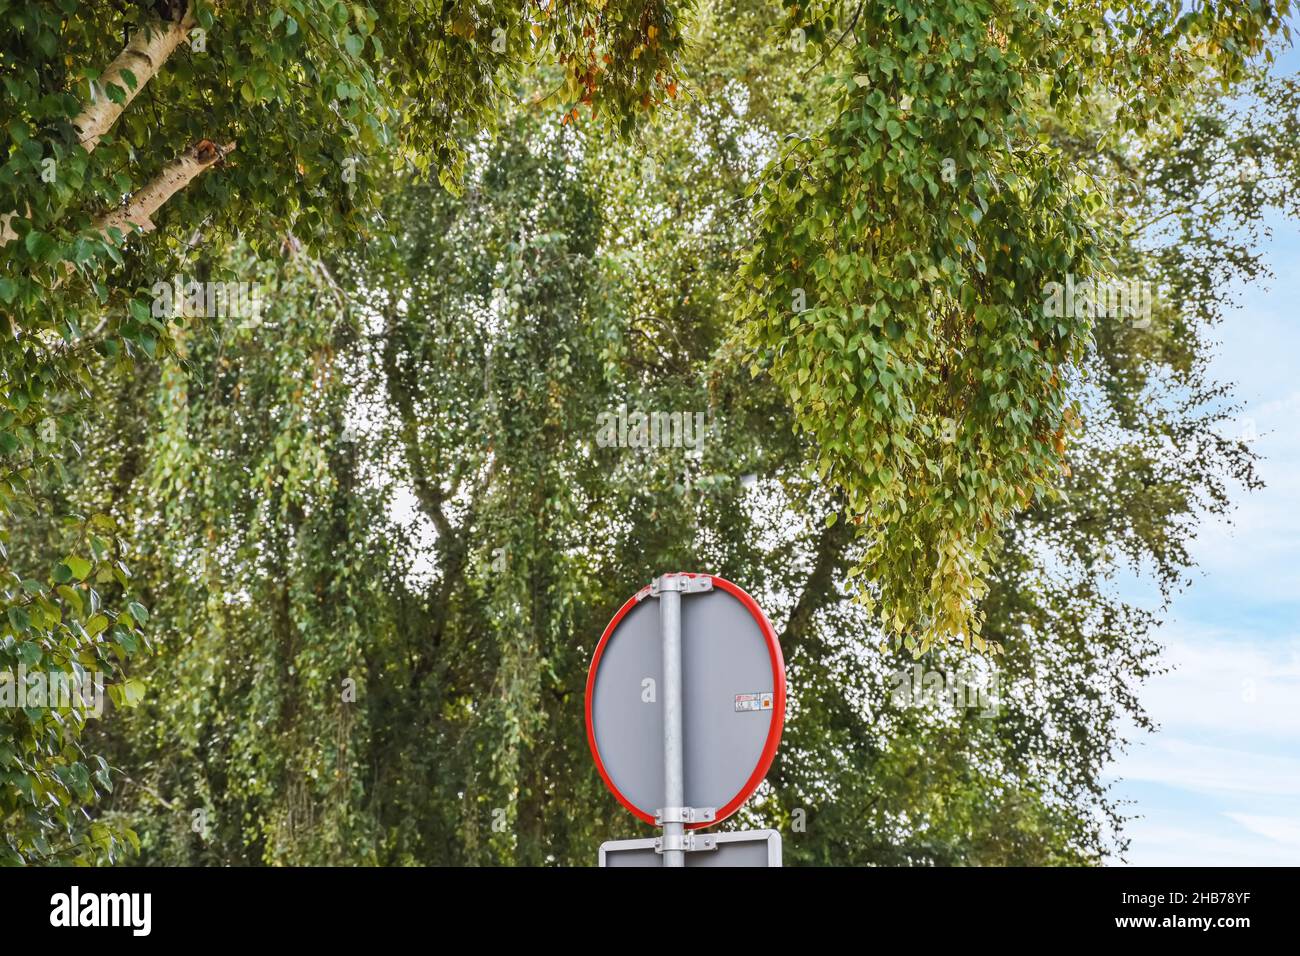 A refreshing view of the green tree branches and the back of the trembling sign Stock Photo